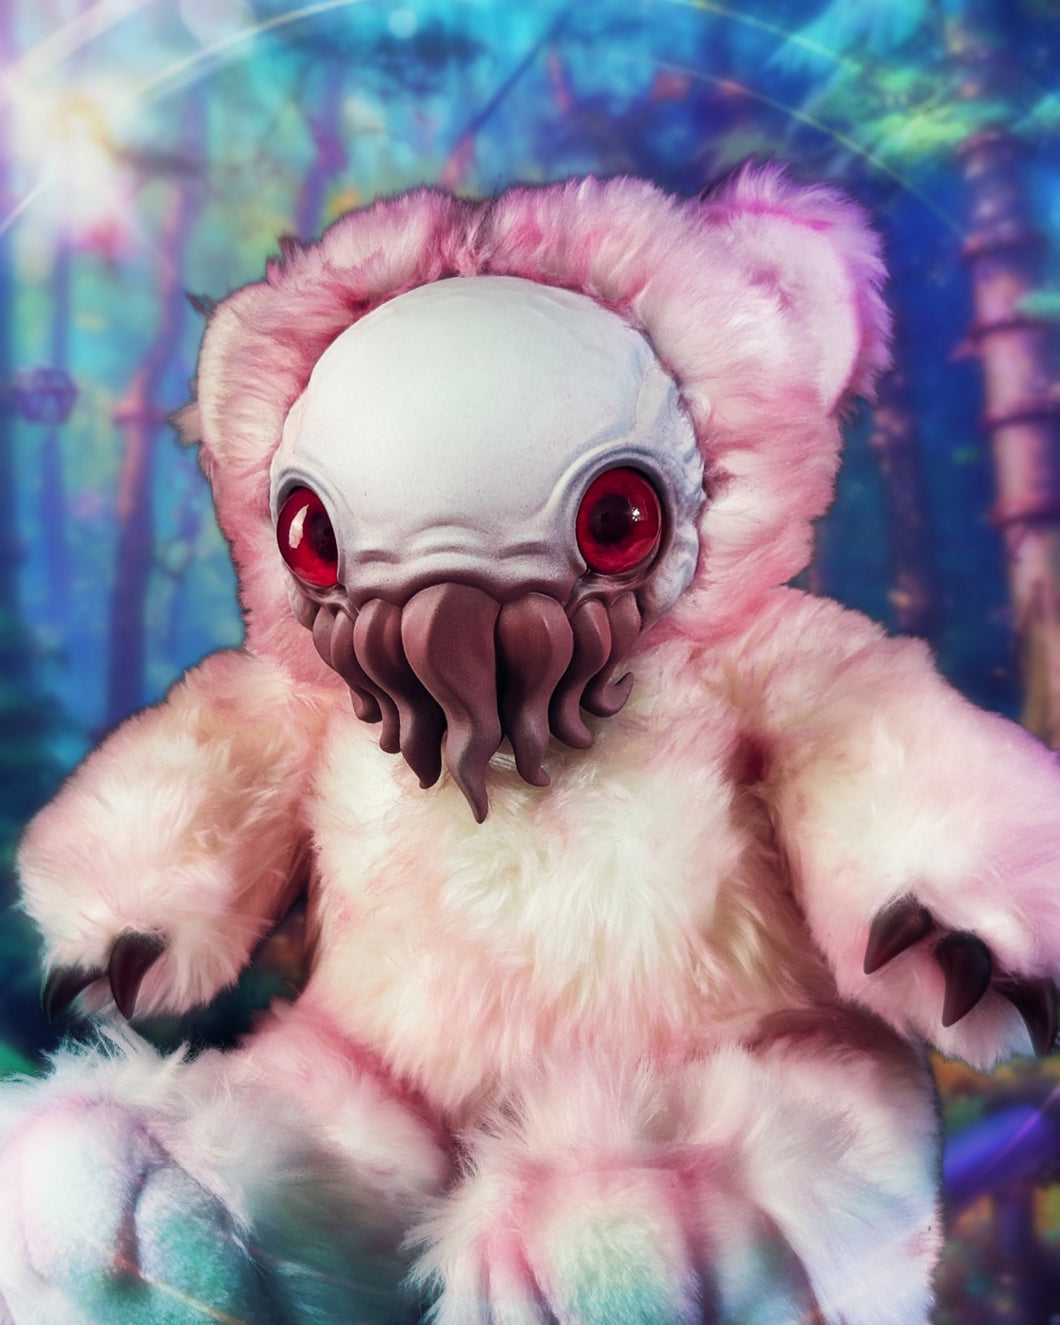 Mania-Spawn: ELDINUTH - CRYPTCRITZ Handcrafted Lovecraftian Cthulhu Art Doll Plush Toy for Eldritch Entities